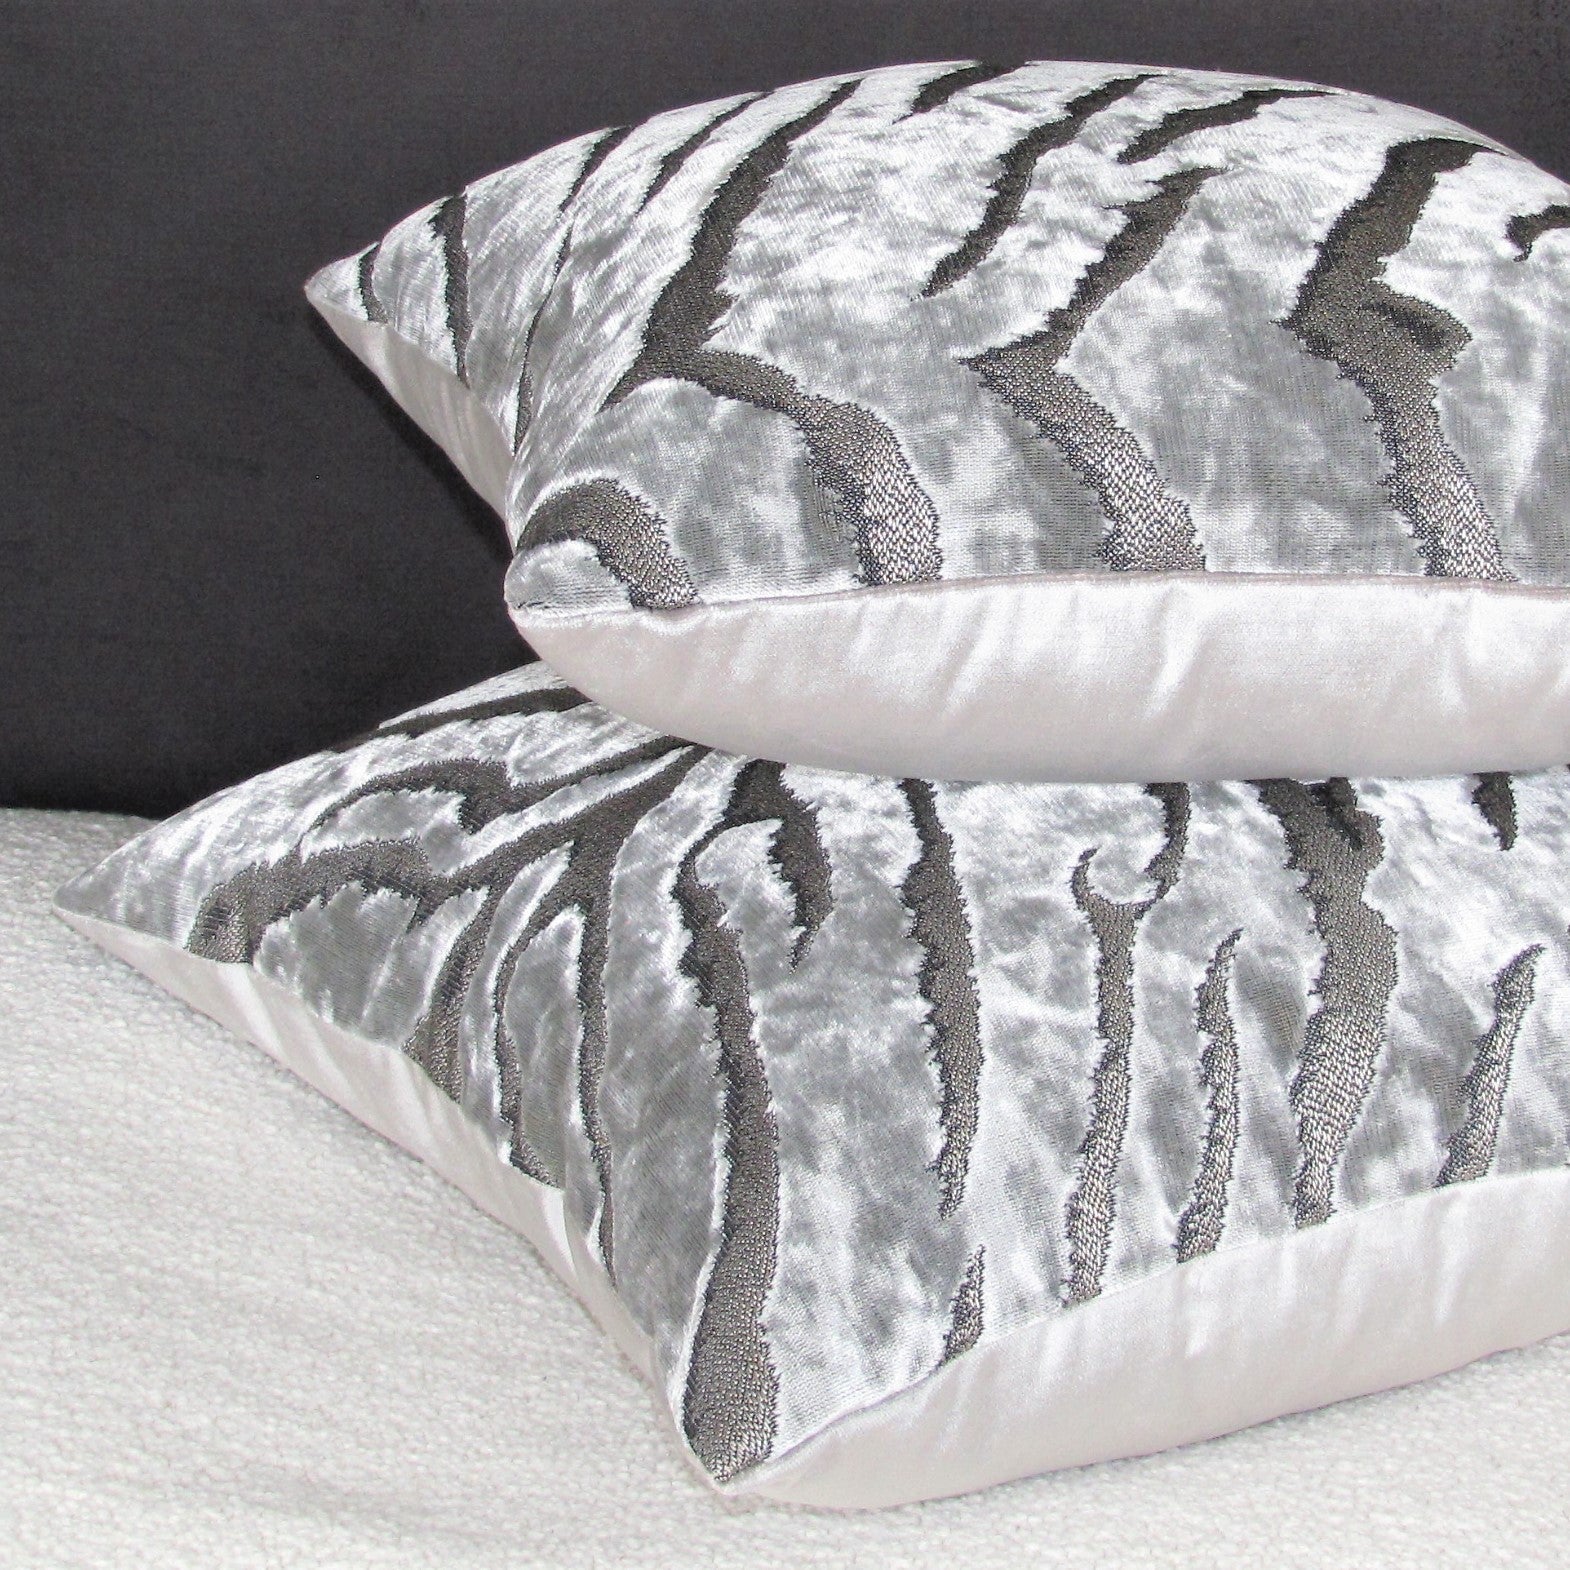 Made to order Bengal Tiger Silver Cushion Cover